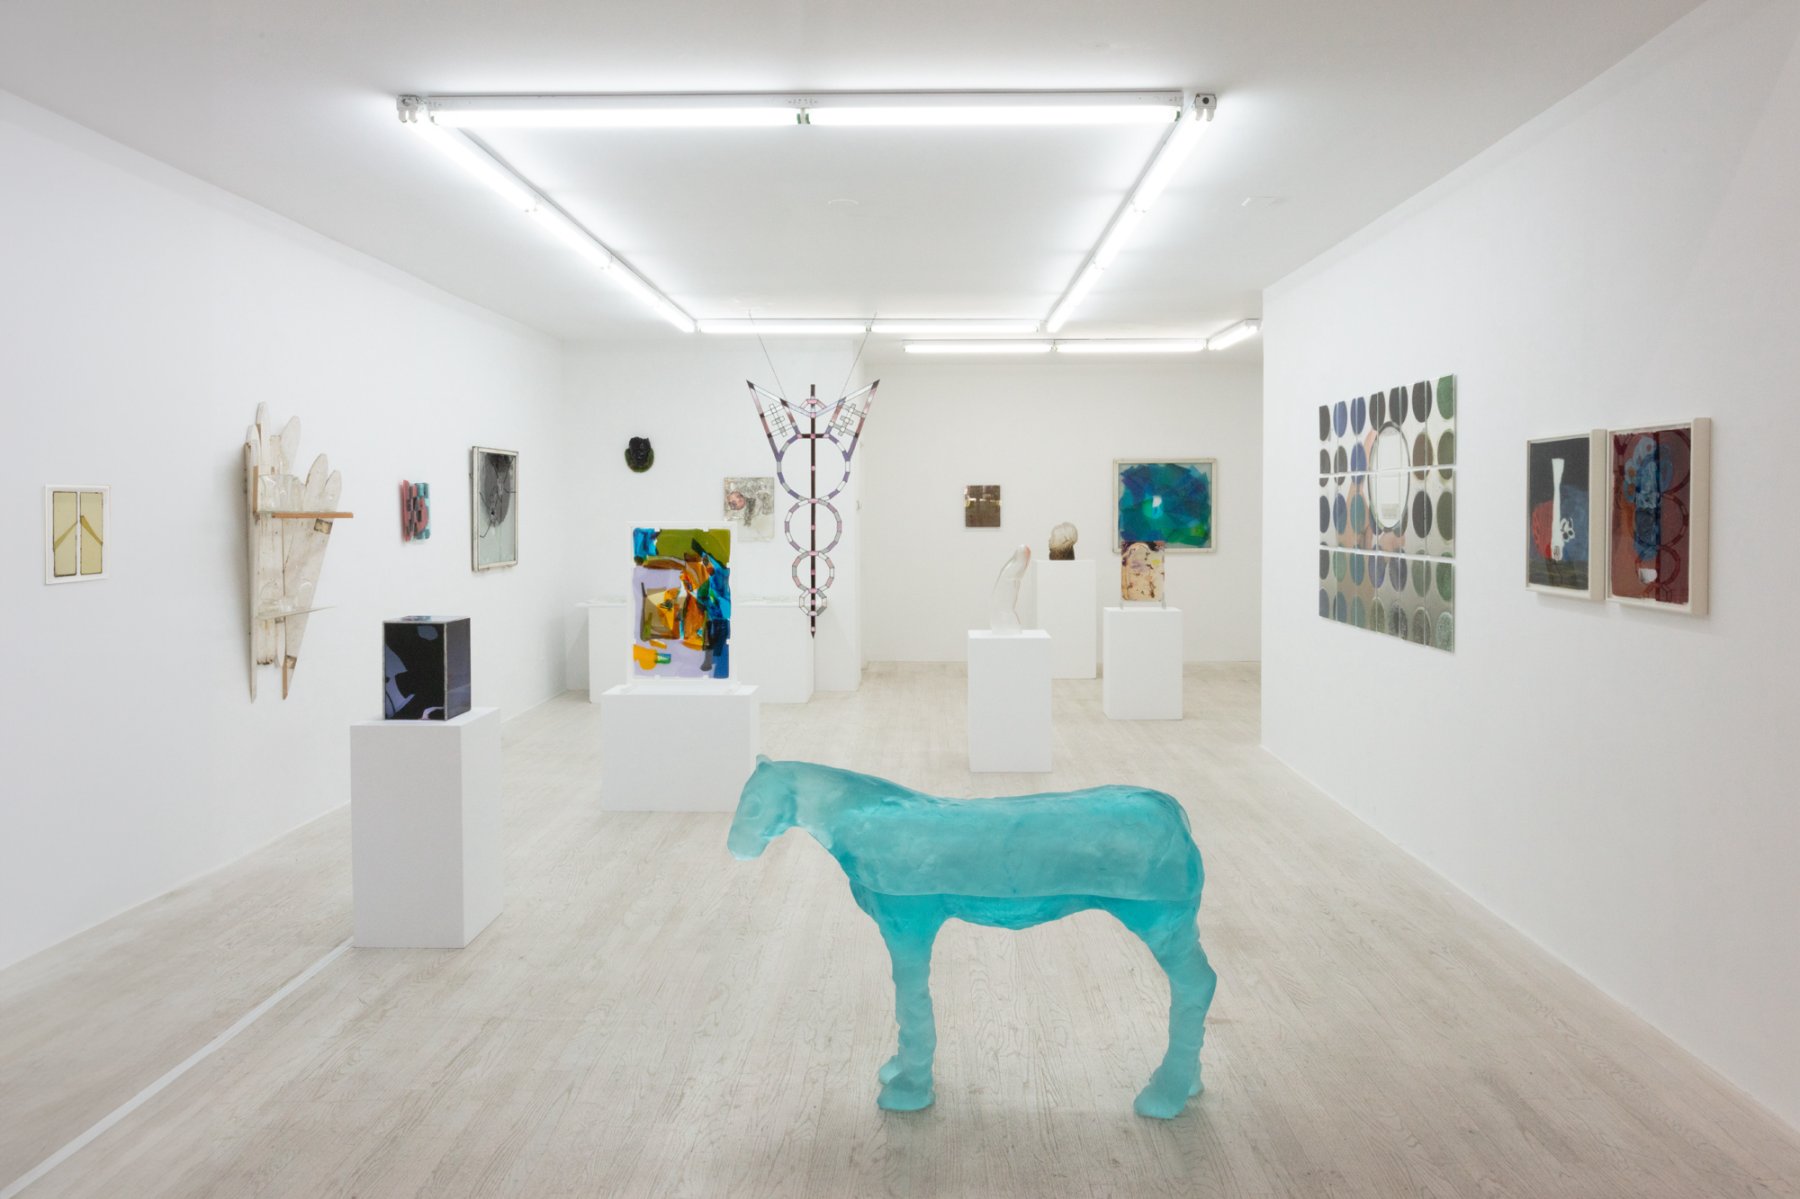 Installation image for The Glass Show, at Halsey McKay Gallery